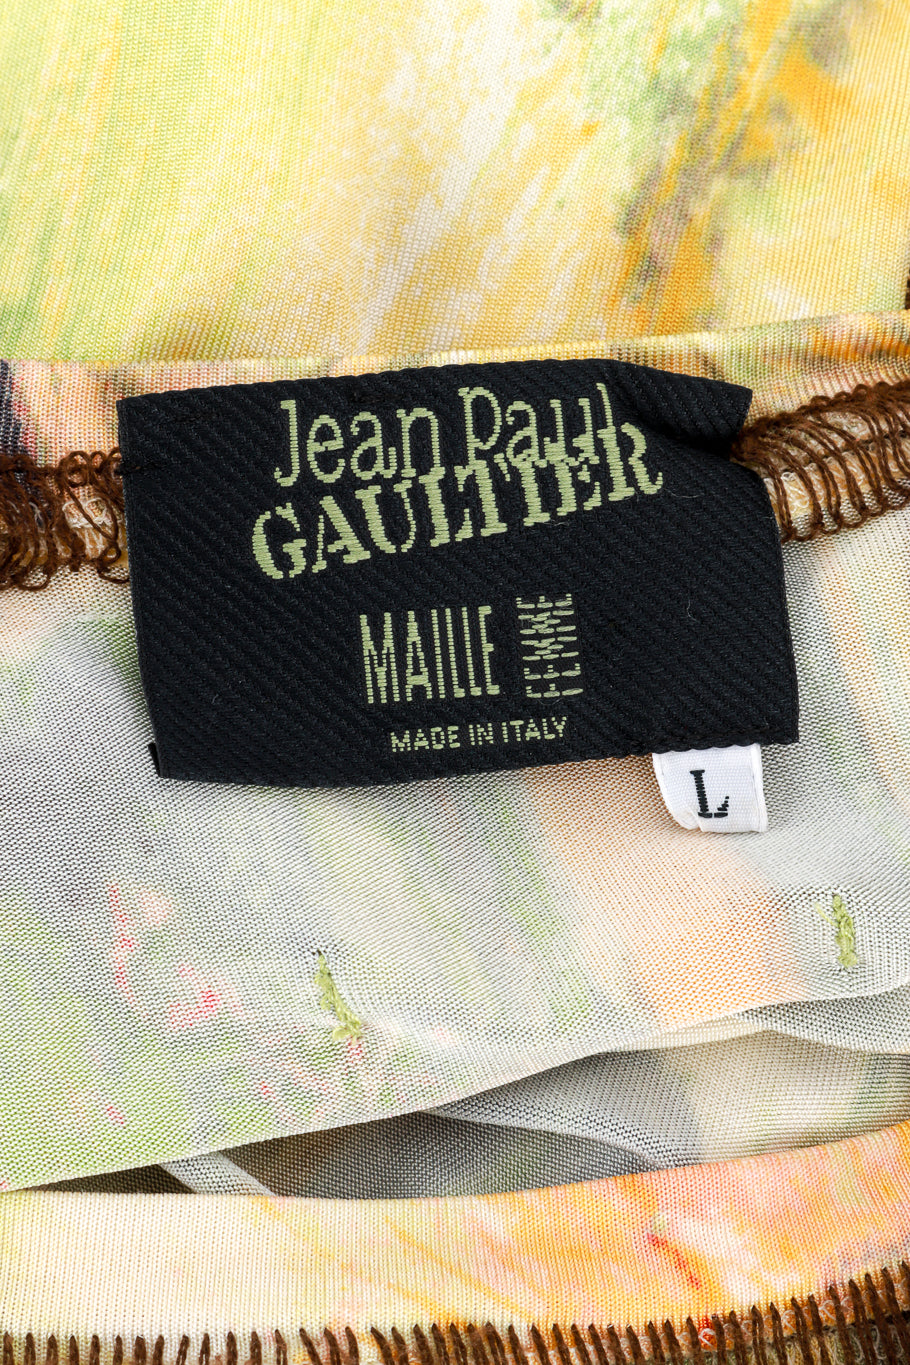 Vintage Jean Paul Gaultier ballerina print poncho cape flat lay detail of the makers label reading 'Jean Paul Gaultier